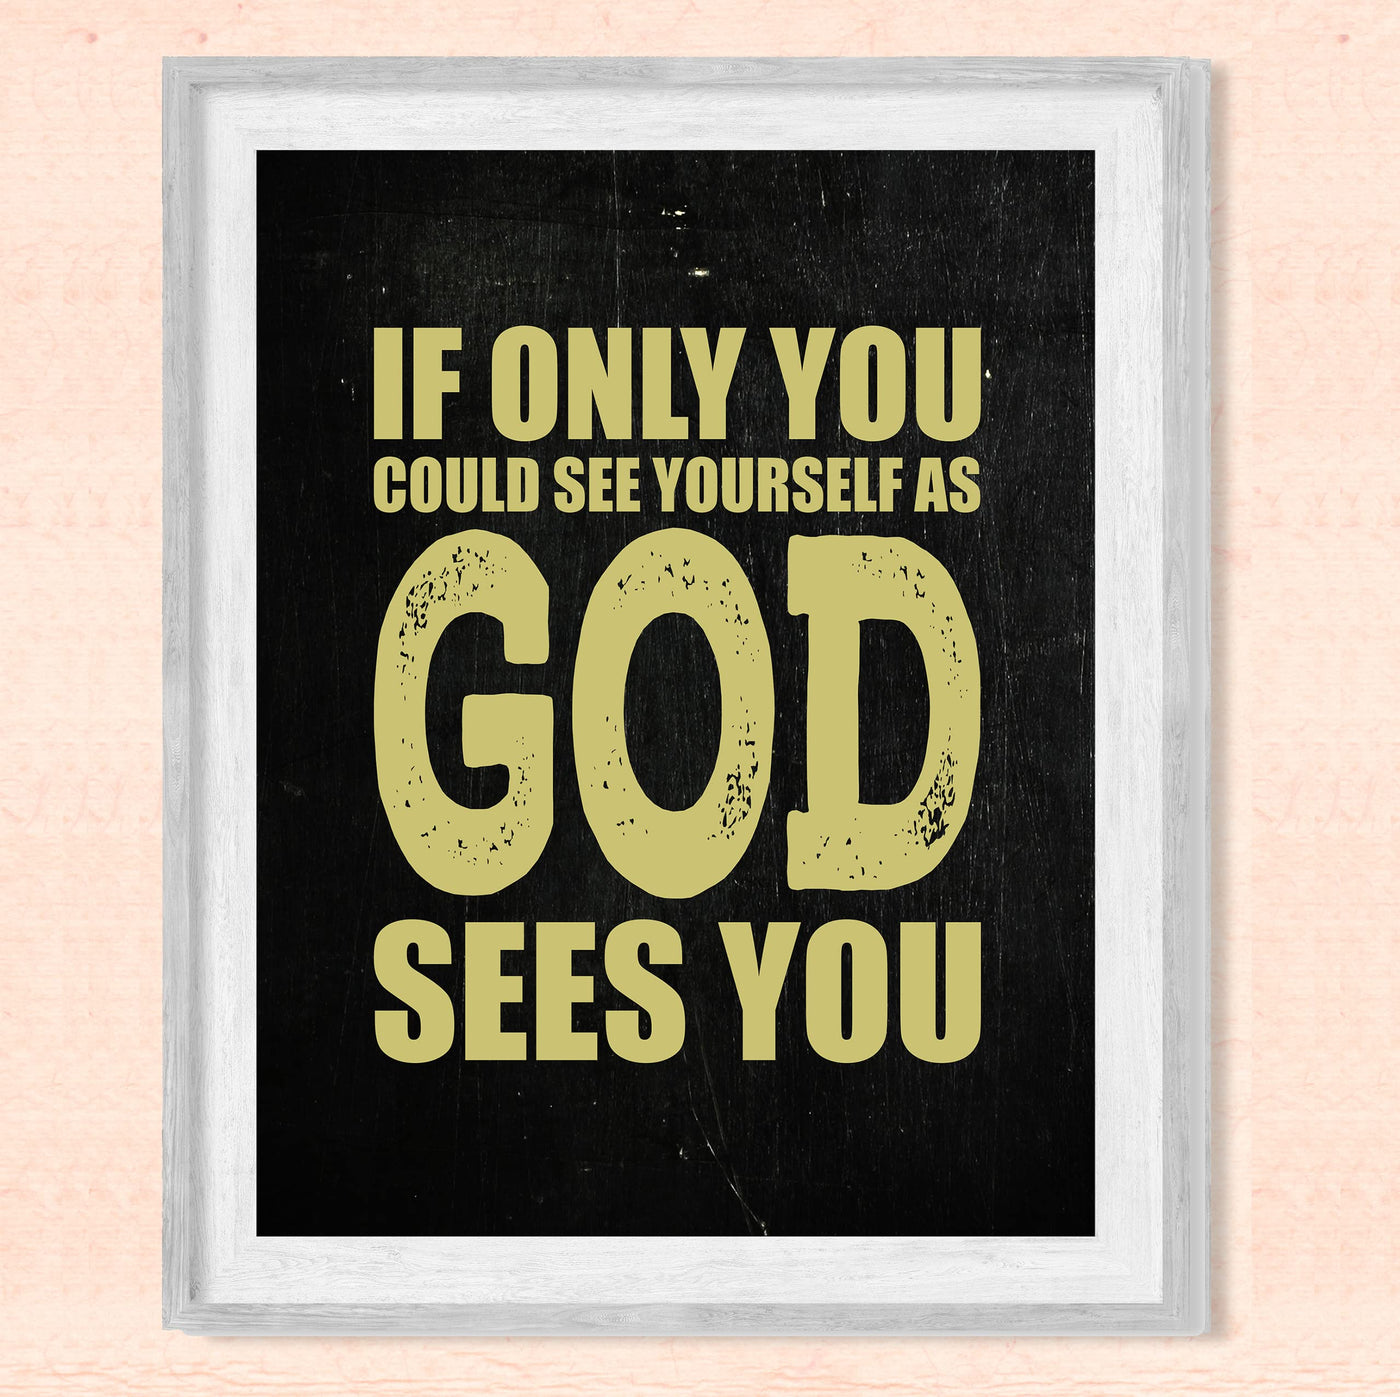 If You Could See Yourself As God Sees You Inspirational Wall Print-8 x 10" Rustic Typographic Design-Ready to Frame. Christian Wall Art for Home-Office-Church Decor. Great Gift & Reminder of Faith!